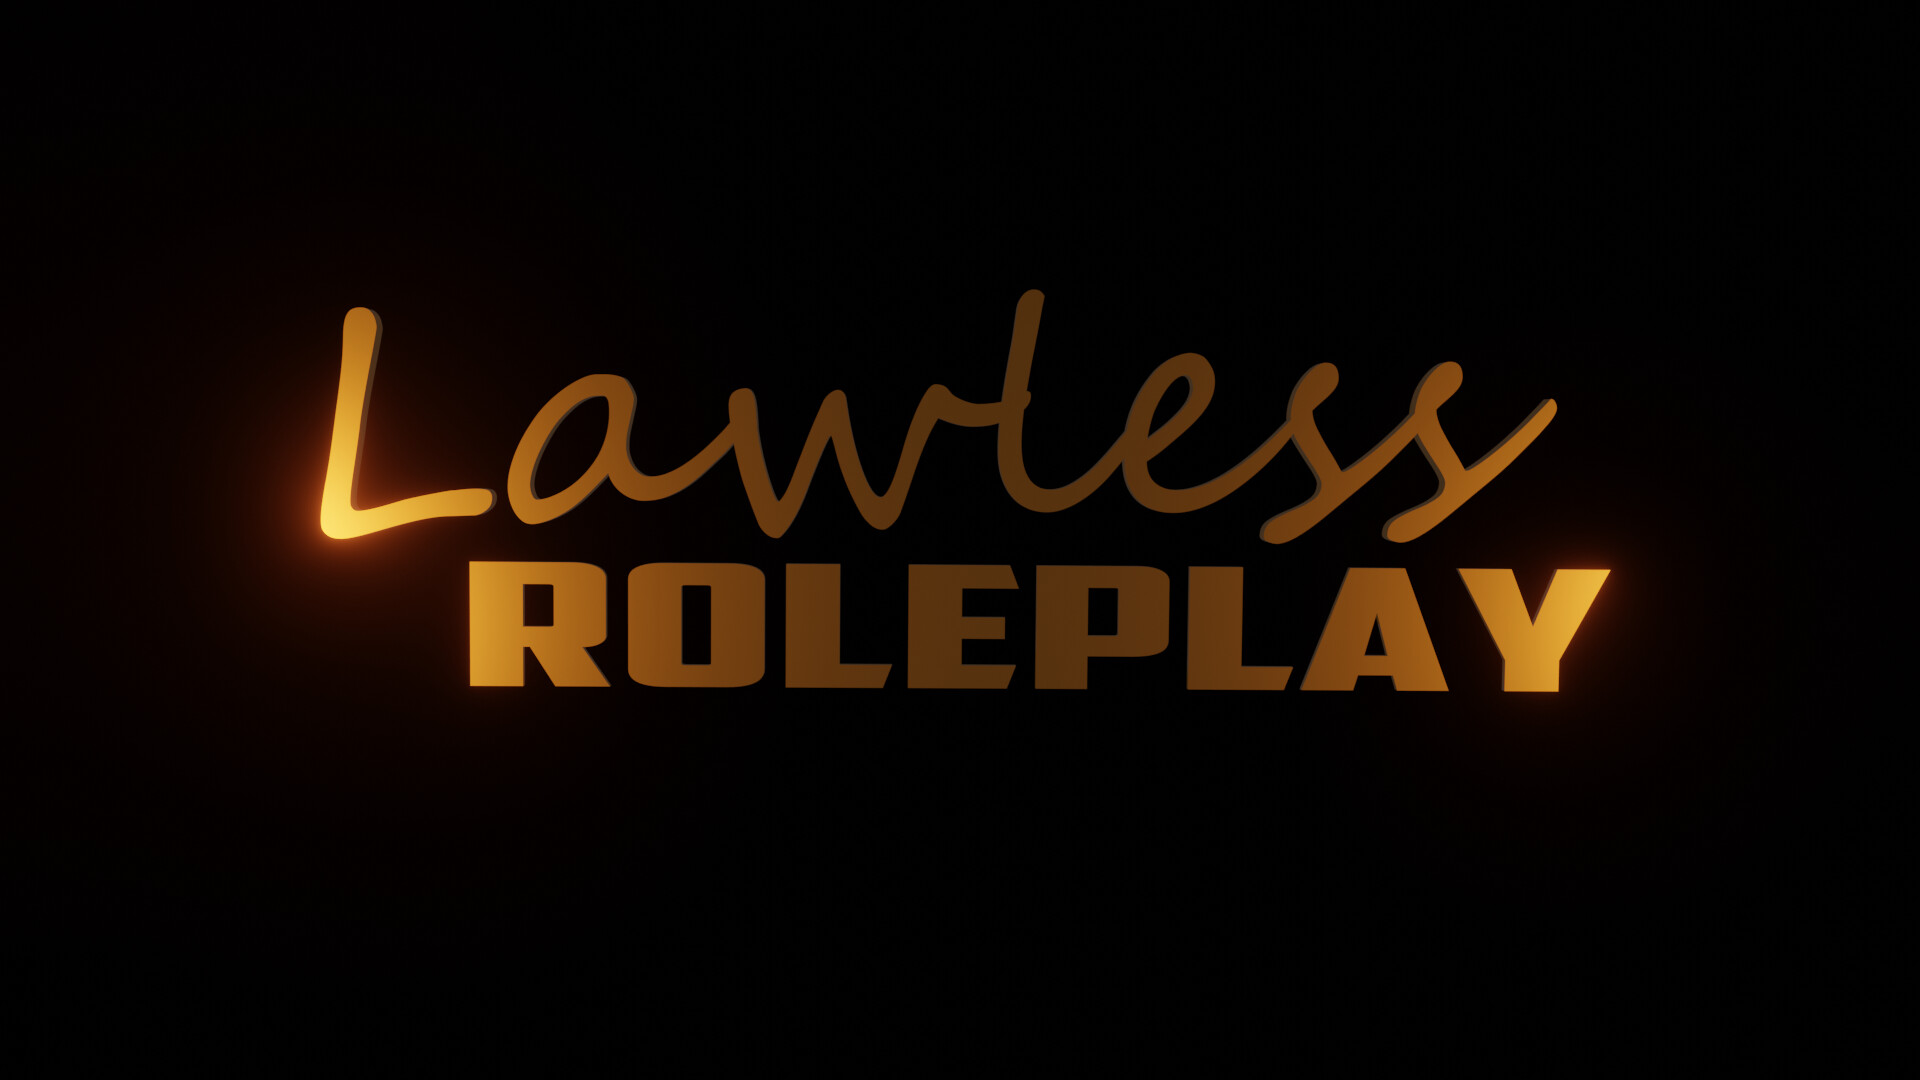 Lawless Roleplay